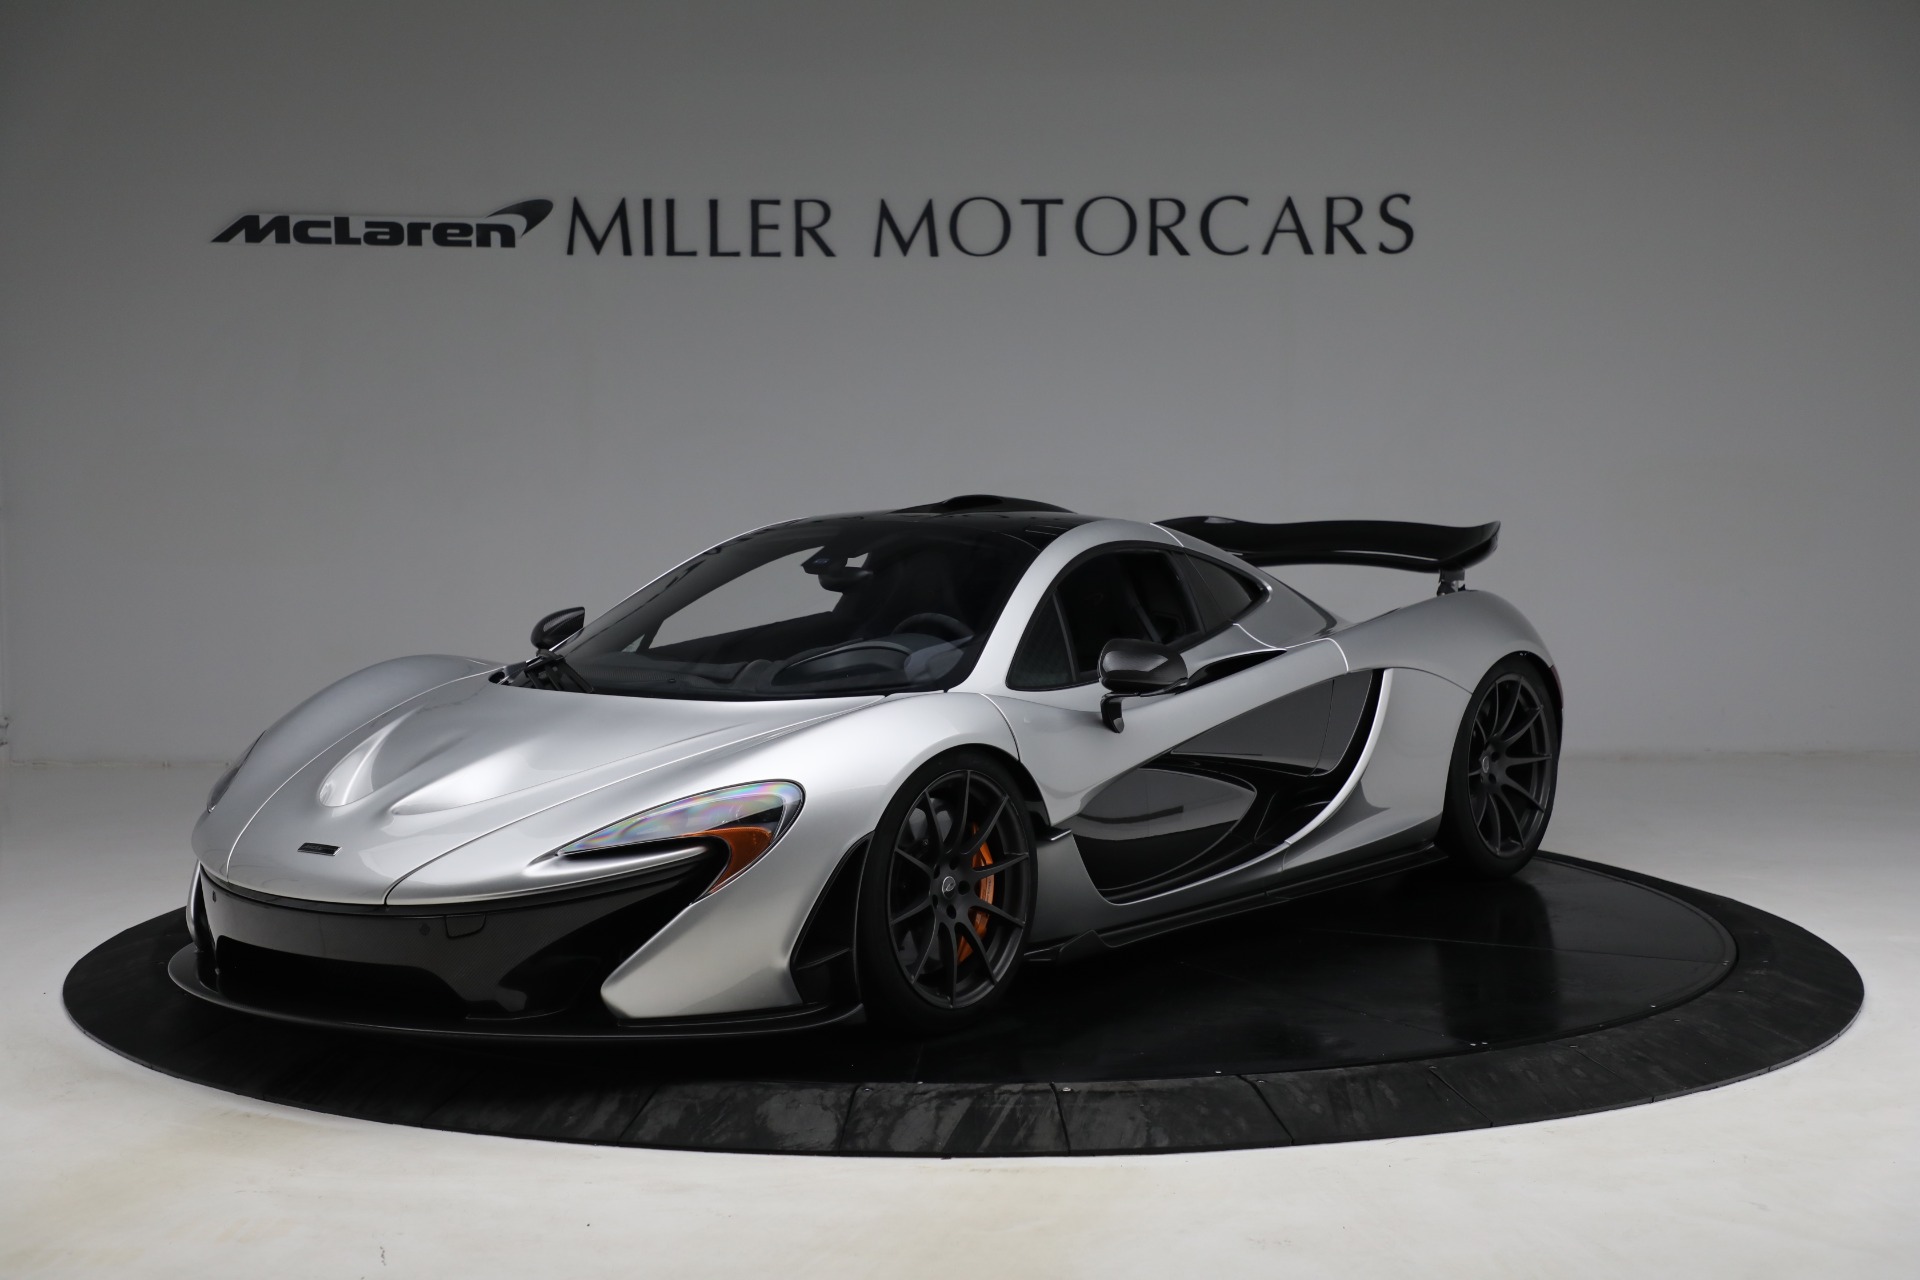 Used 2015 McLaren P1 for sale $1,825,000 at Bentley Greenwich in Greenwich CT 06830 1